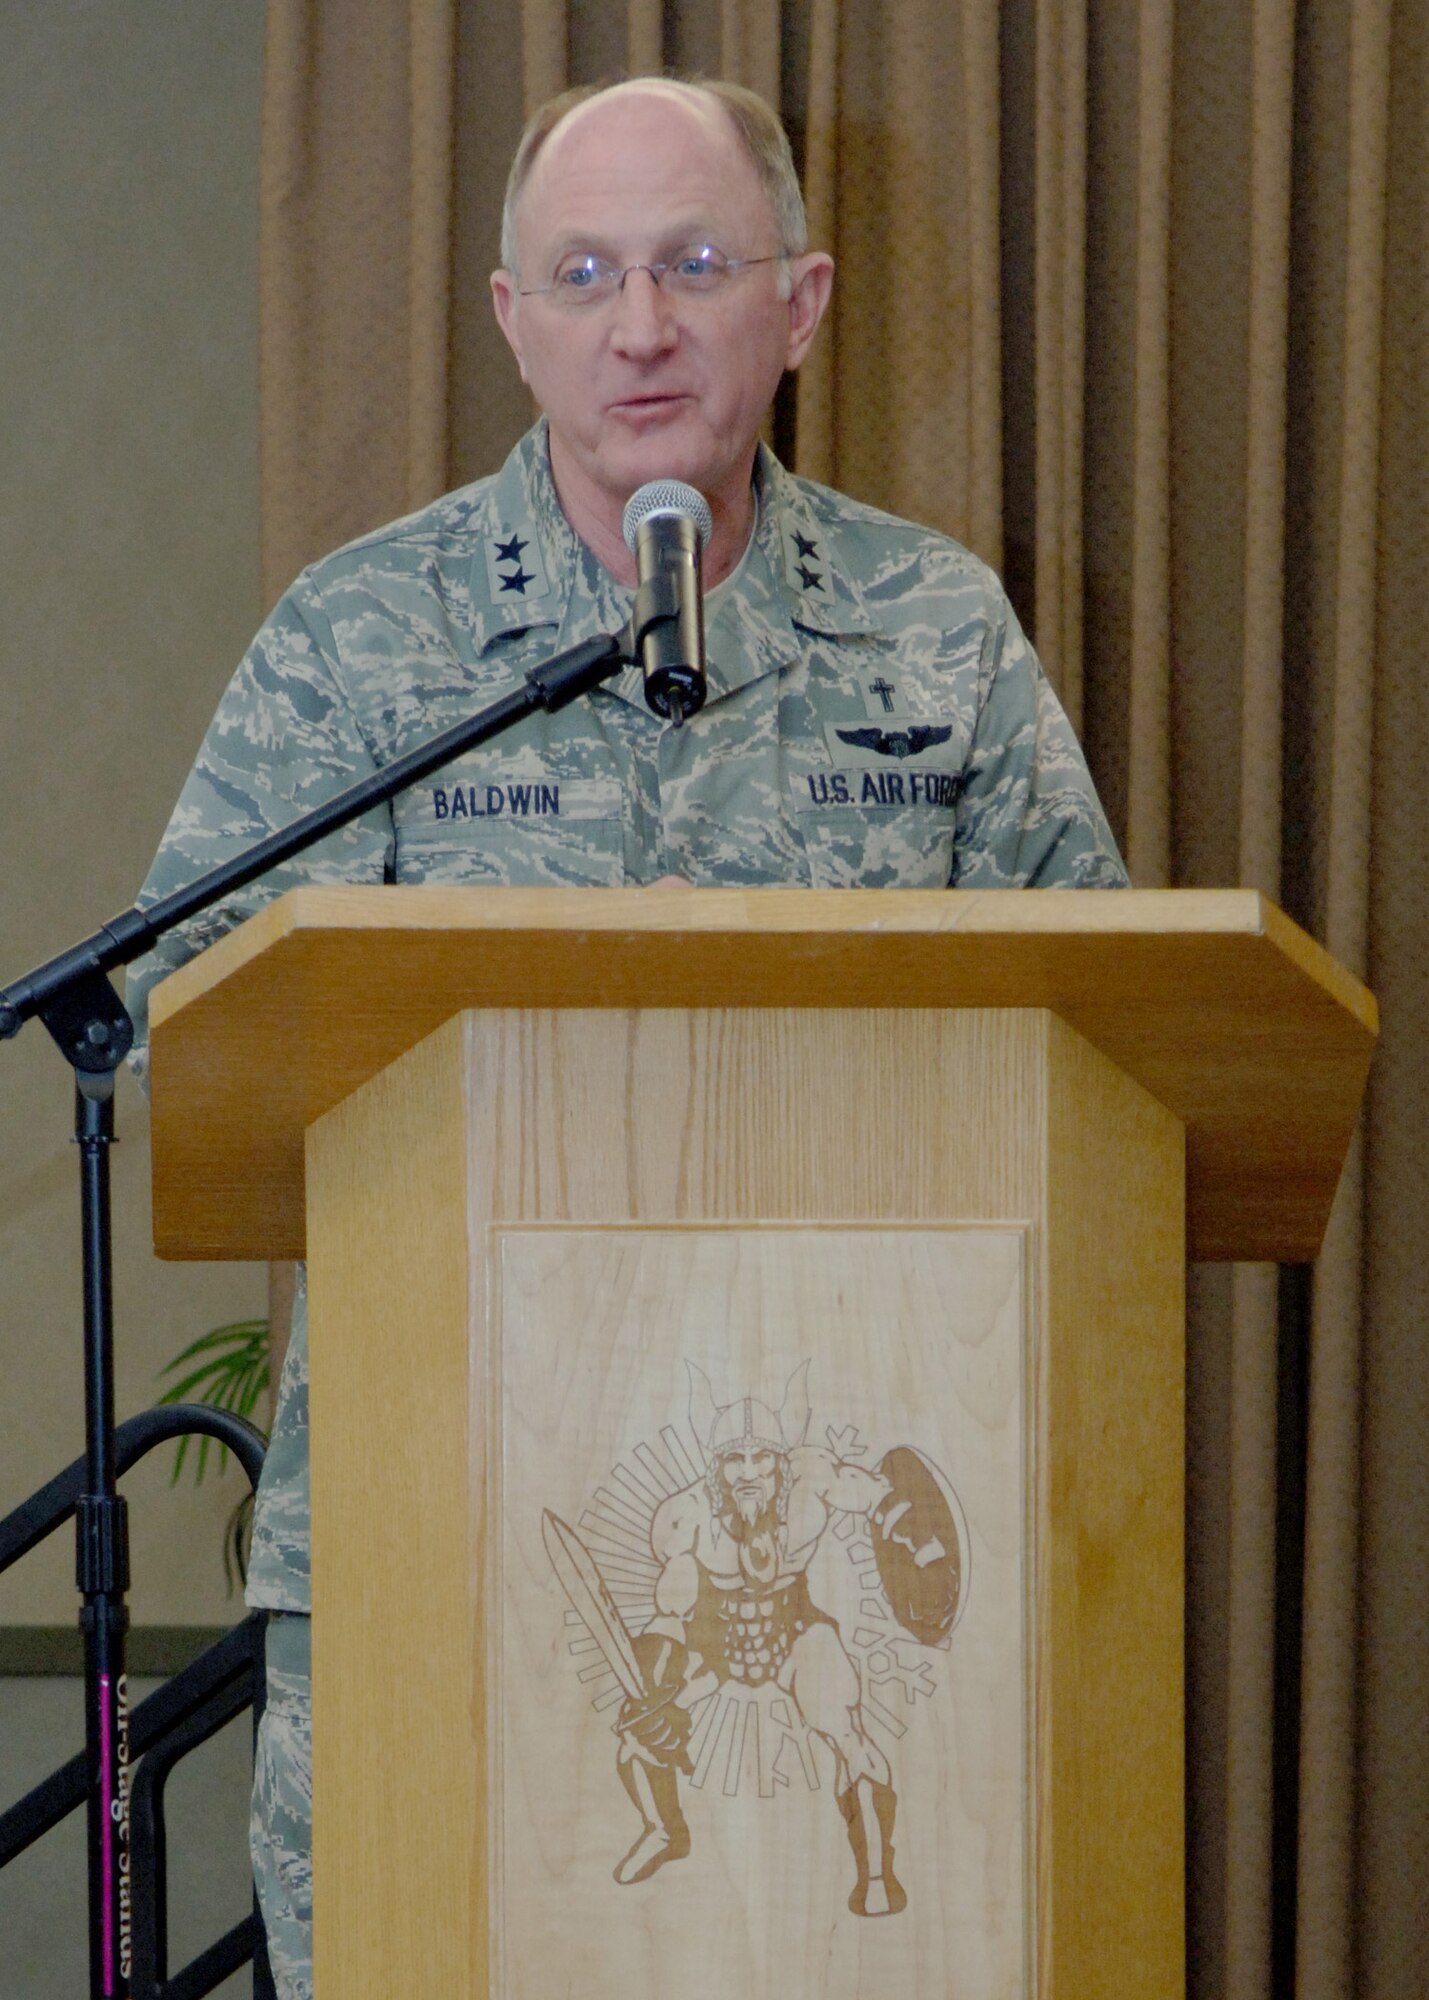 Chaplain, Maj. Gen. Charles C. Baldwin, Air Force Chief of Chaplains, speaks to members of the base during the National Prayer Luncheon March 13. The luncheon featured a keynote address on ?iPrayer? designed to communicate religious messages through contemporary metaphors. (U.S. Air Force photo by Senior Airman Tiffany Colburn).  